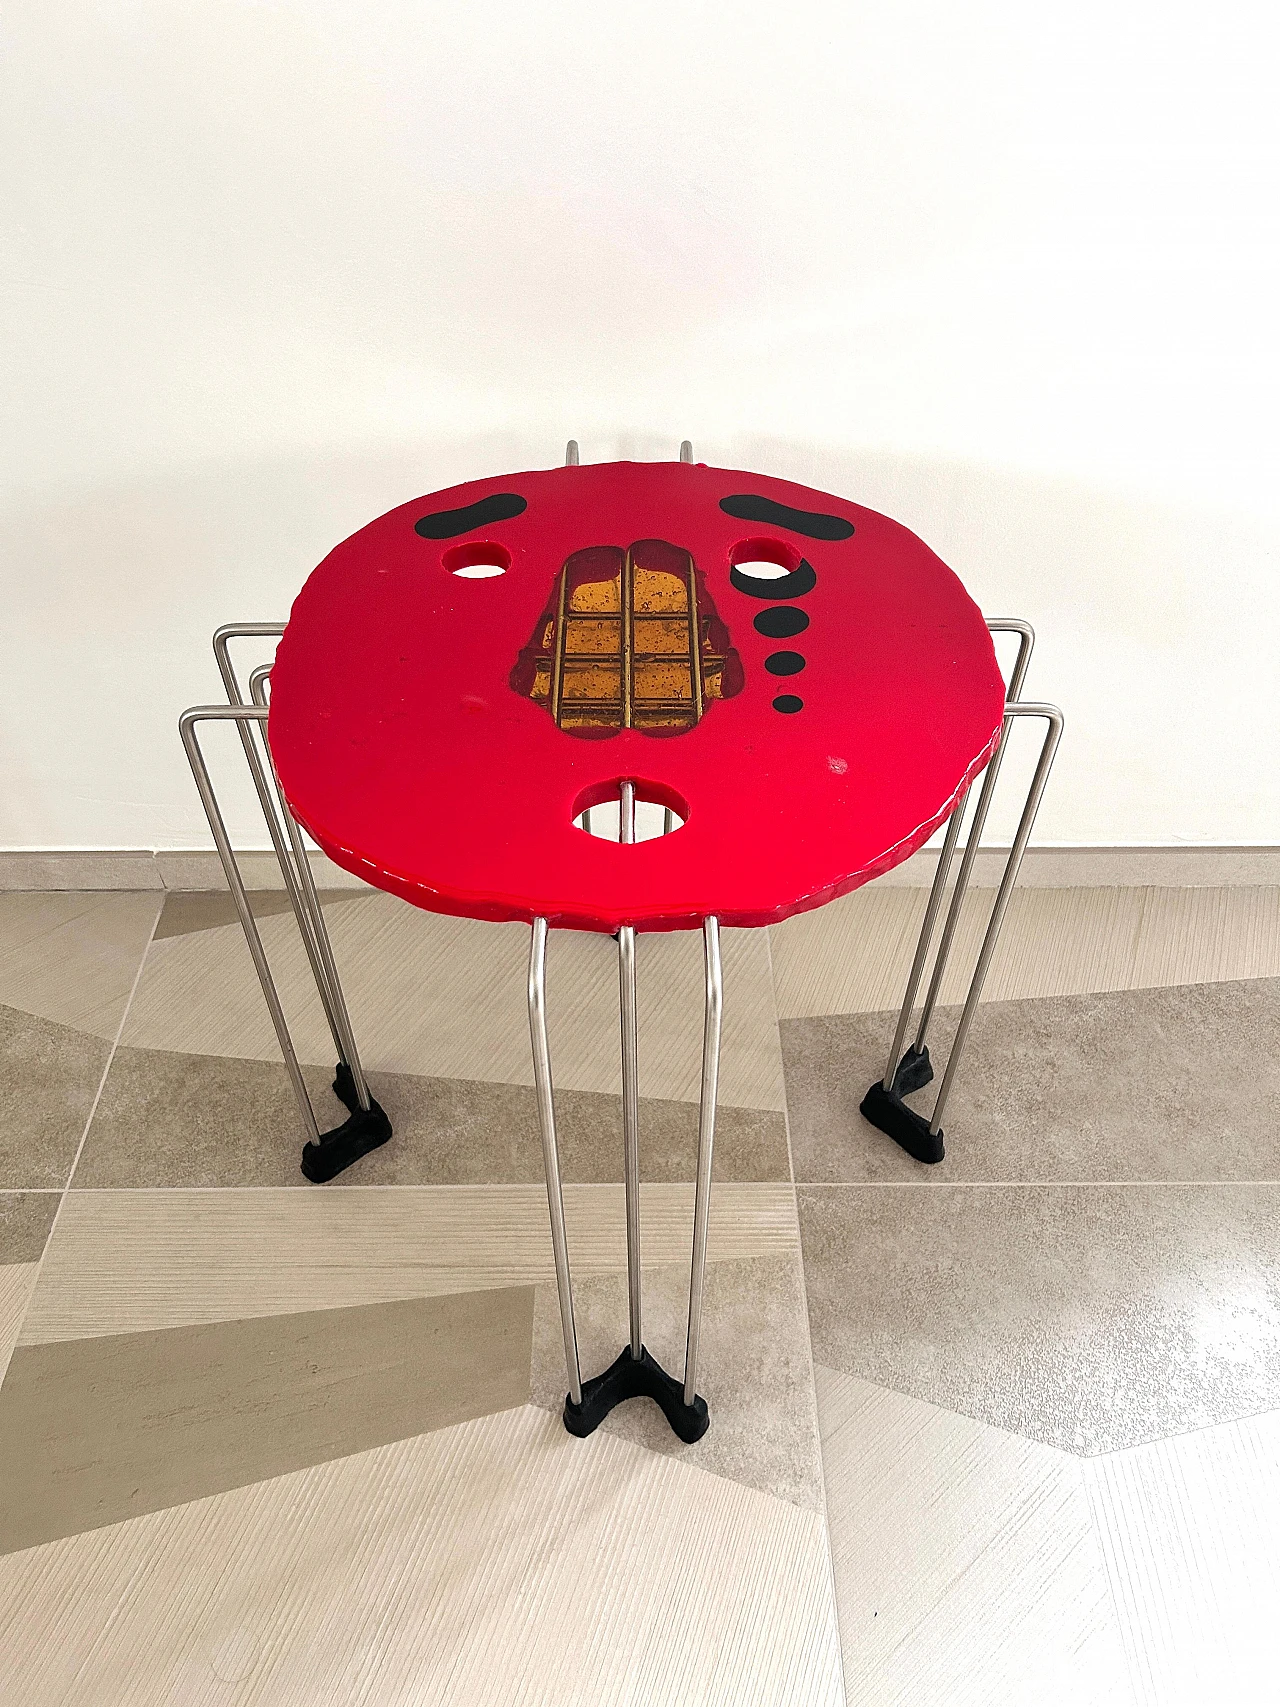 Triple Play coffee table by Gaetano Pesce for Fish Design, 2018 5